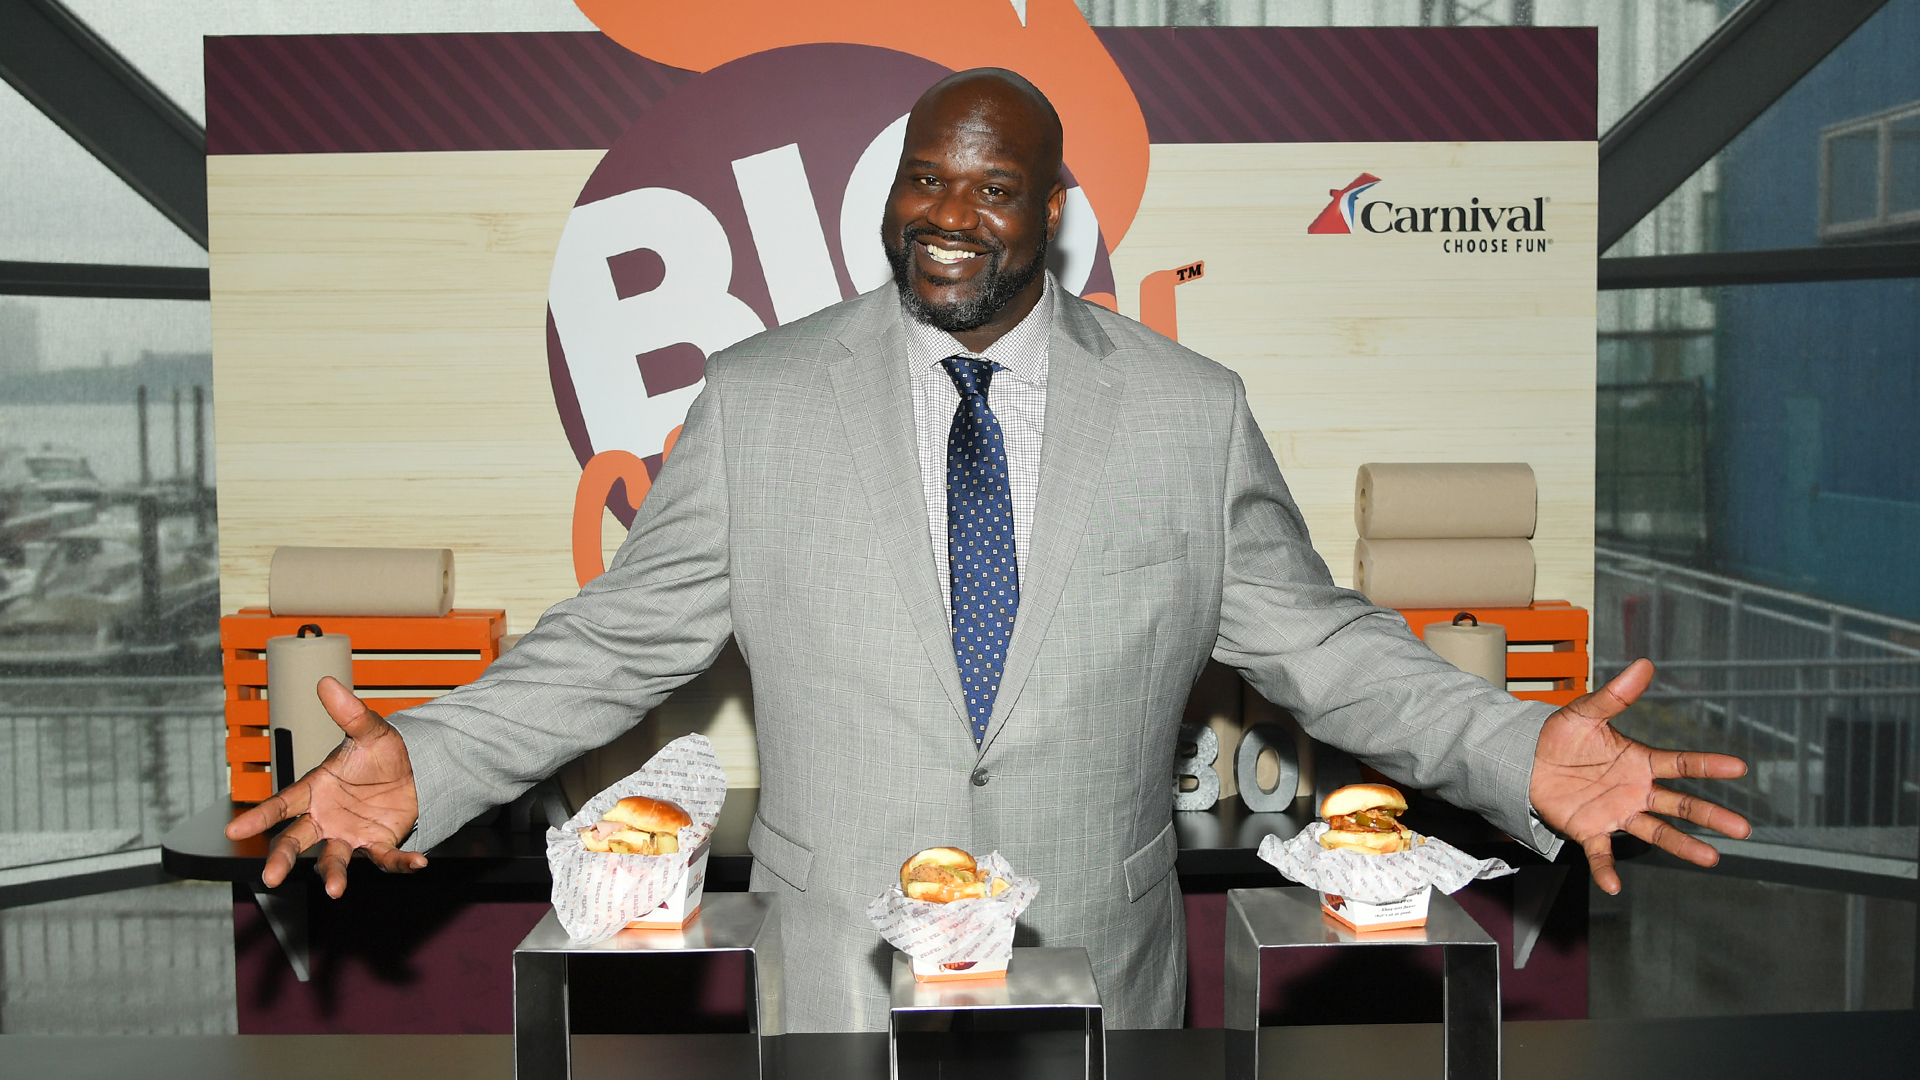 How Shaquille O'Neal Turned A Visit To Carnival Cruise Line Into Another Home For His Chicken Franchise